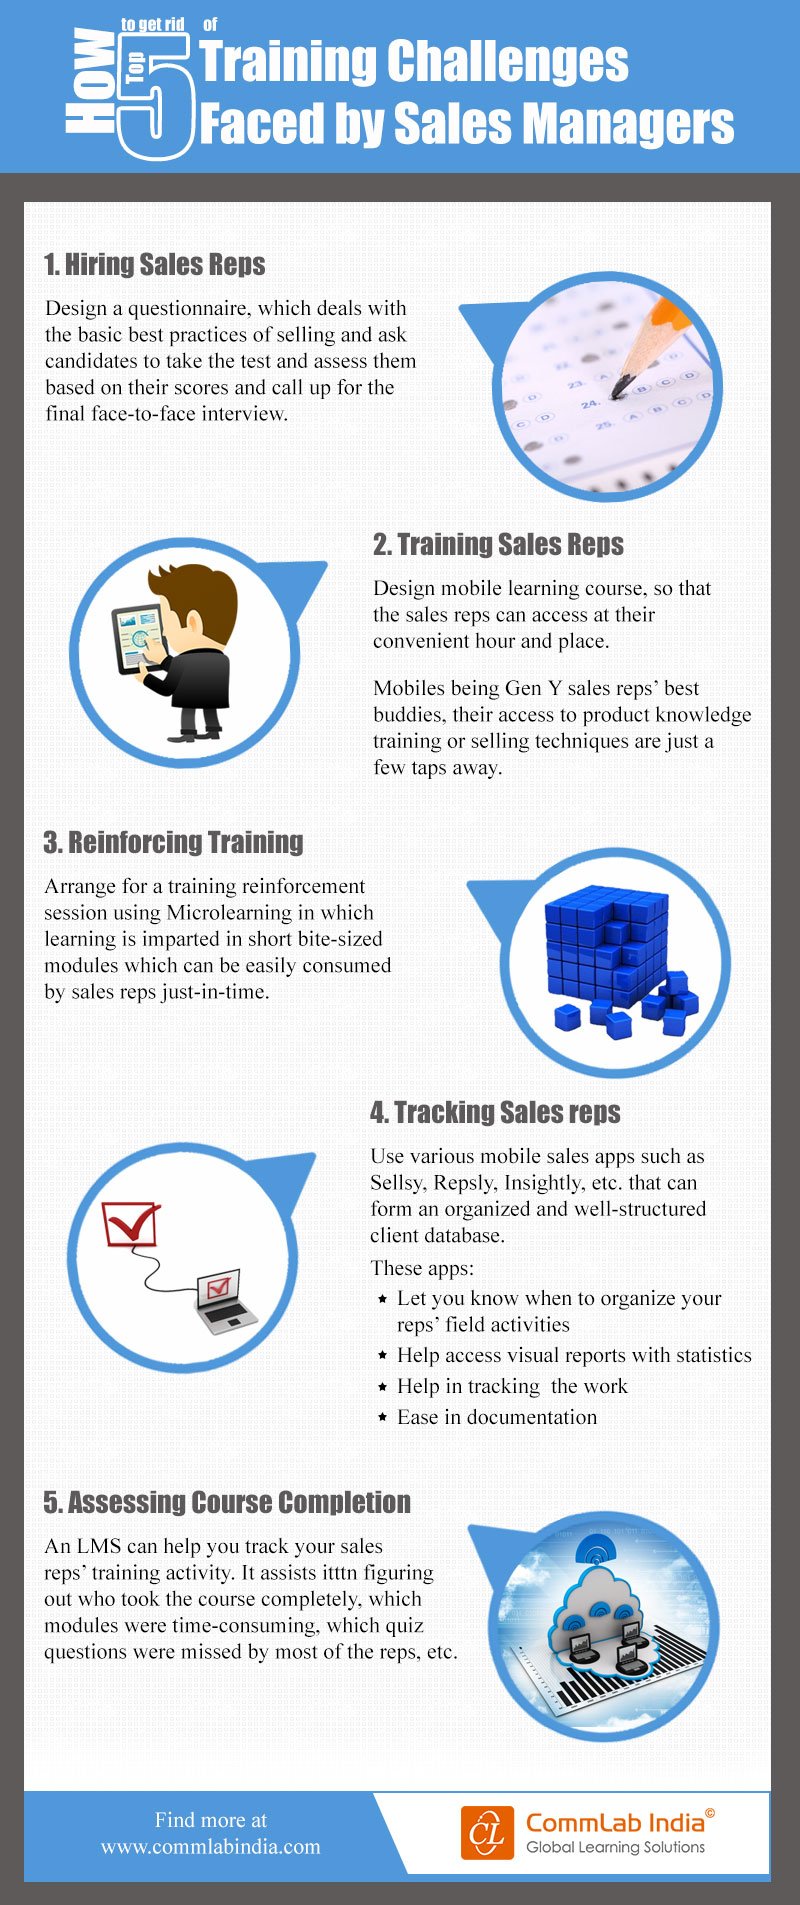 How to Get Rid of Training Challenges Faced by Sales Managers [Infographic]